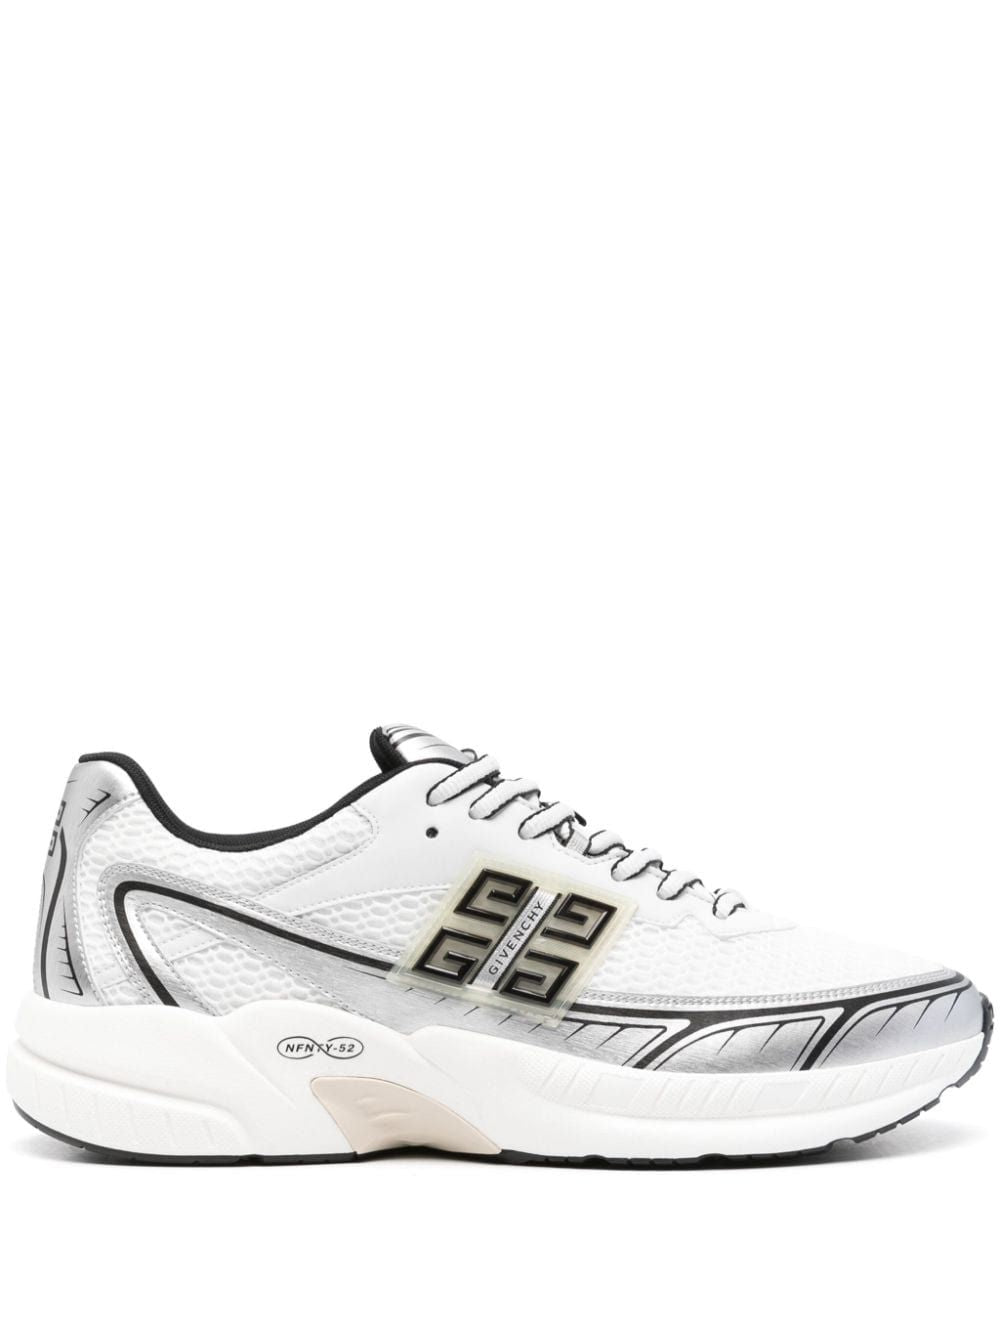 GIVENCHY RUNNERS Sneaker